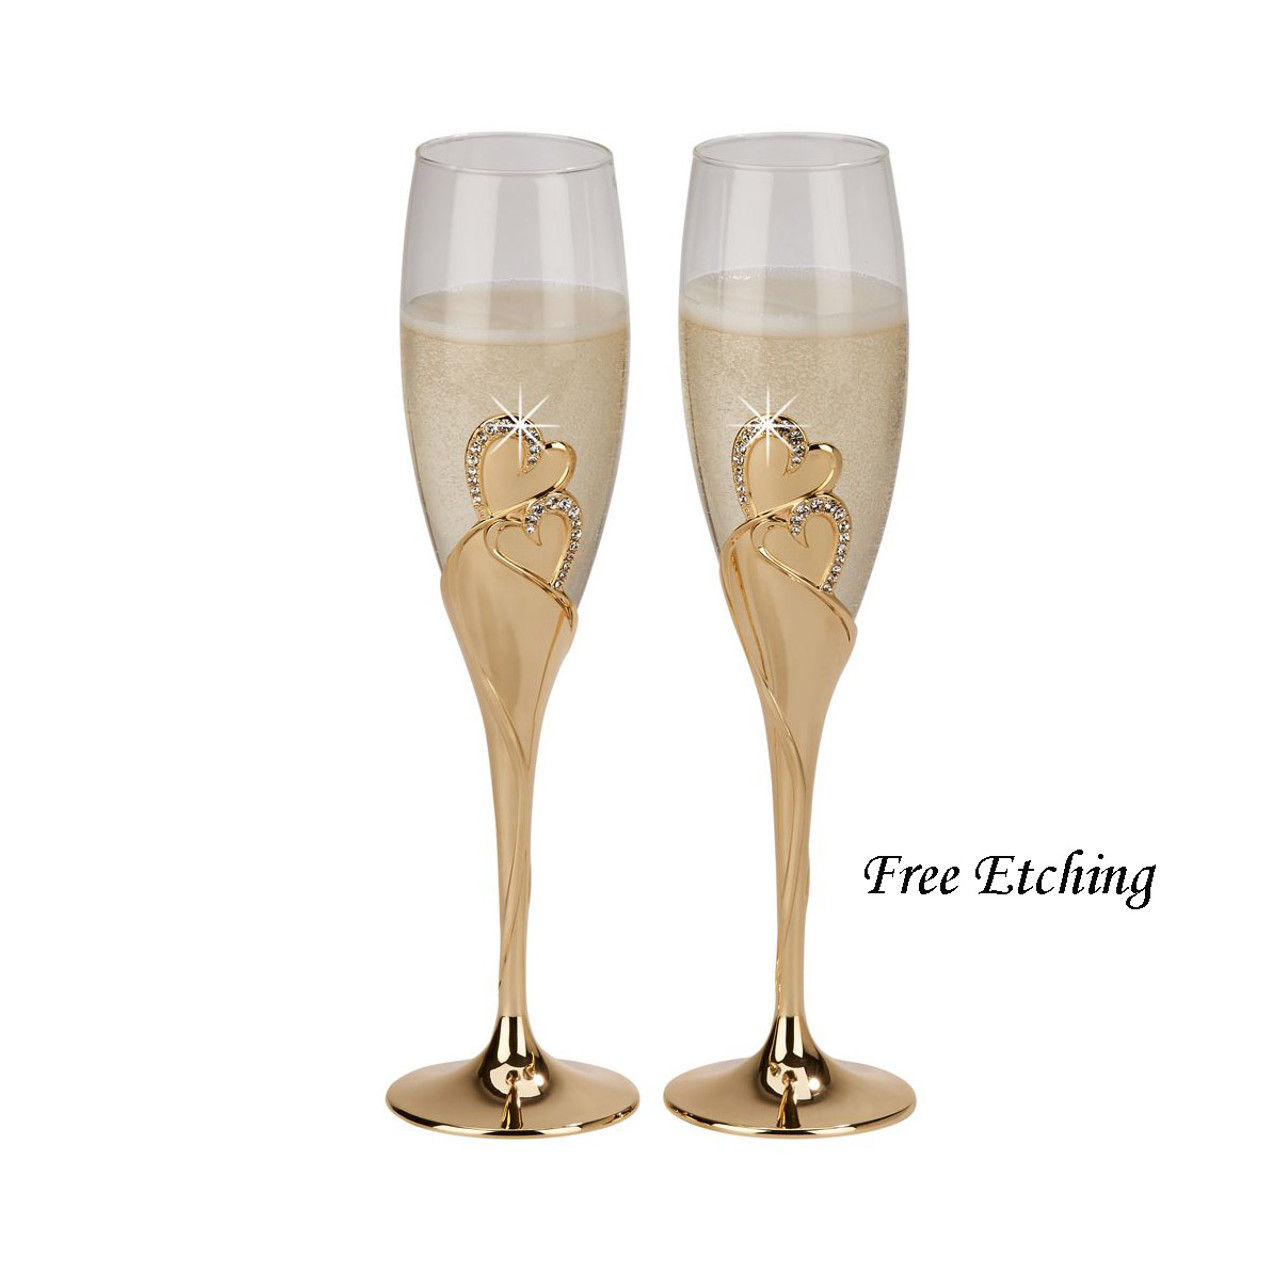 Custom Champagne Flute - Personalized Champagne Glass, Custom Text or  Artwork, Wedding Gifts, Anniversary Champagne Glasses, Design: CUSTOM